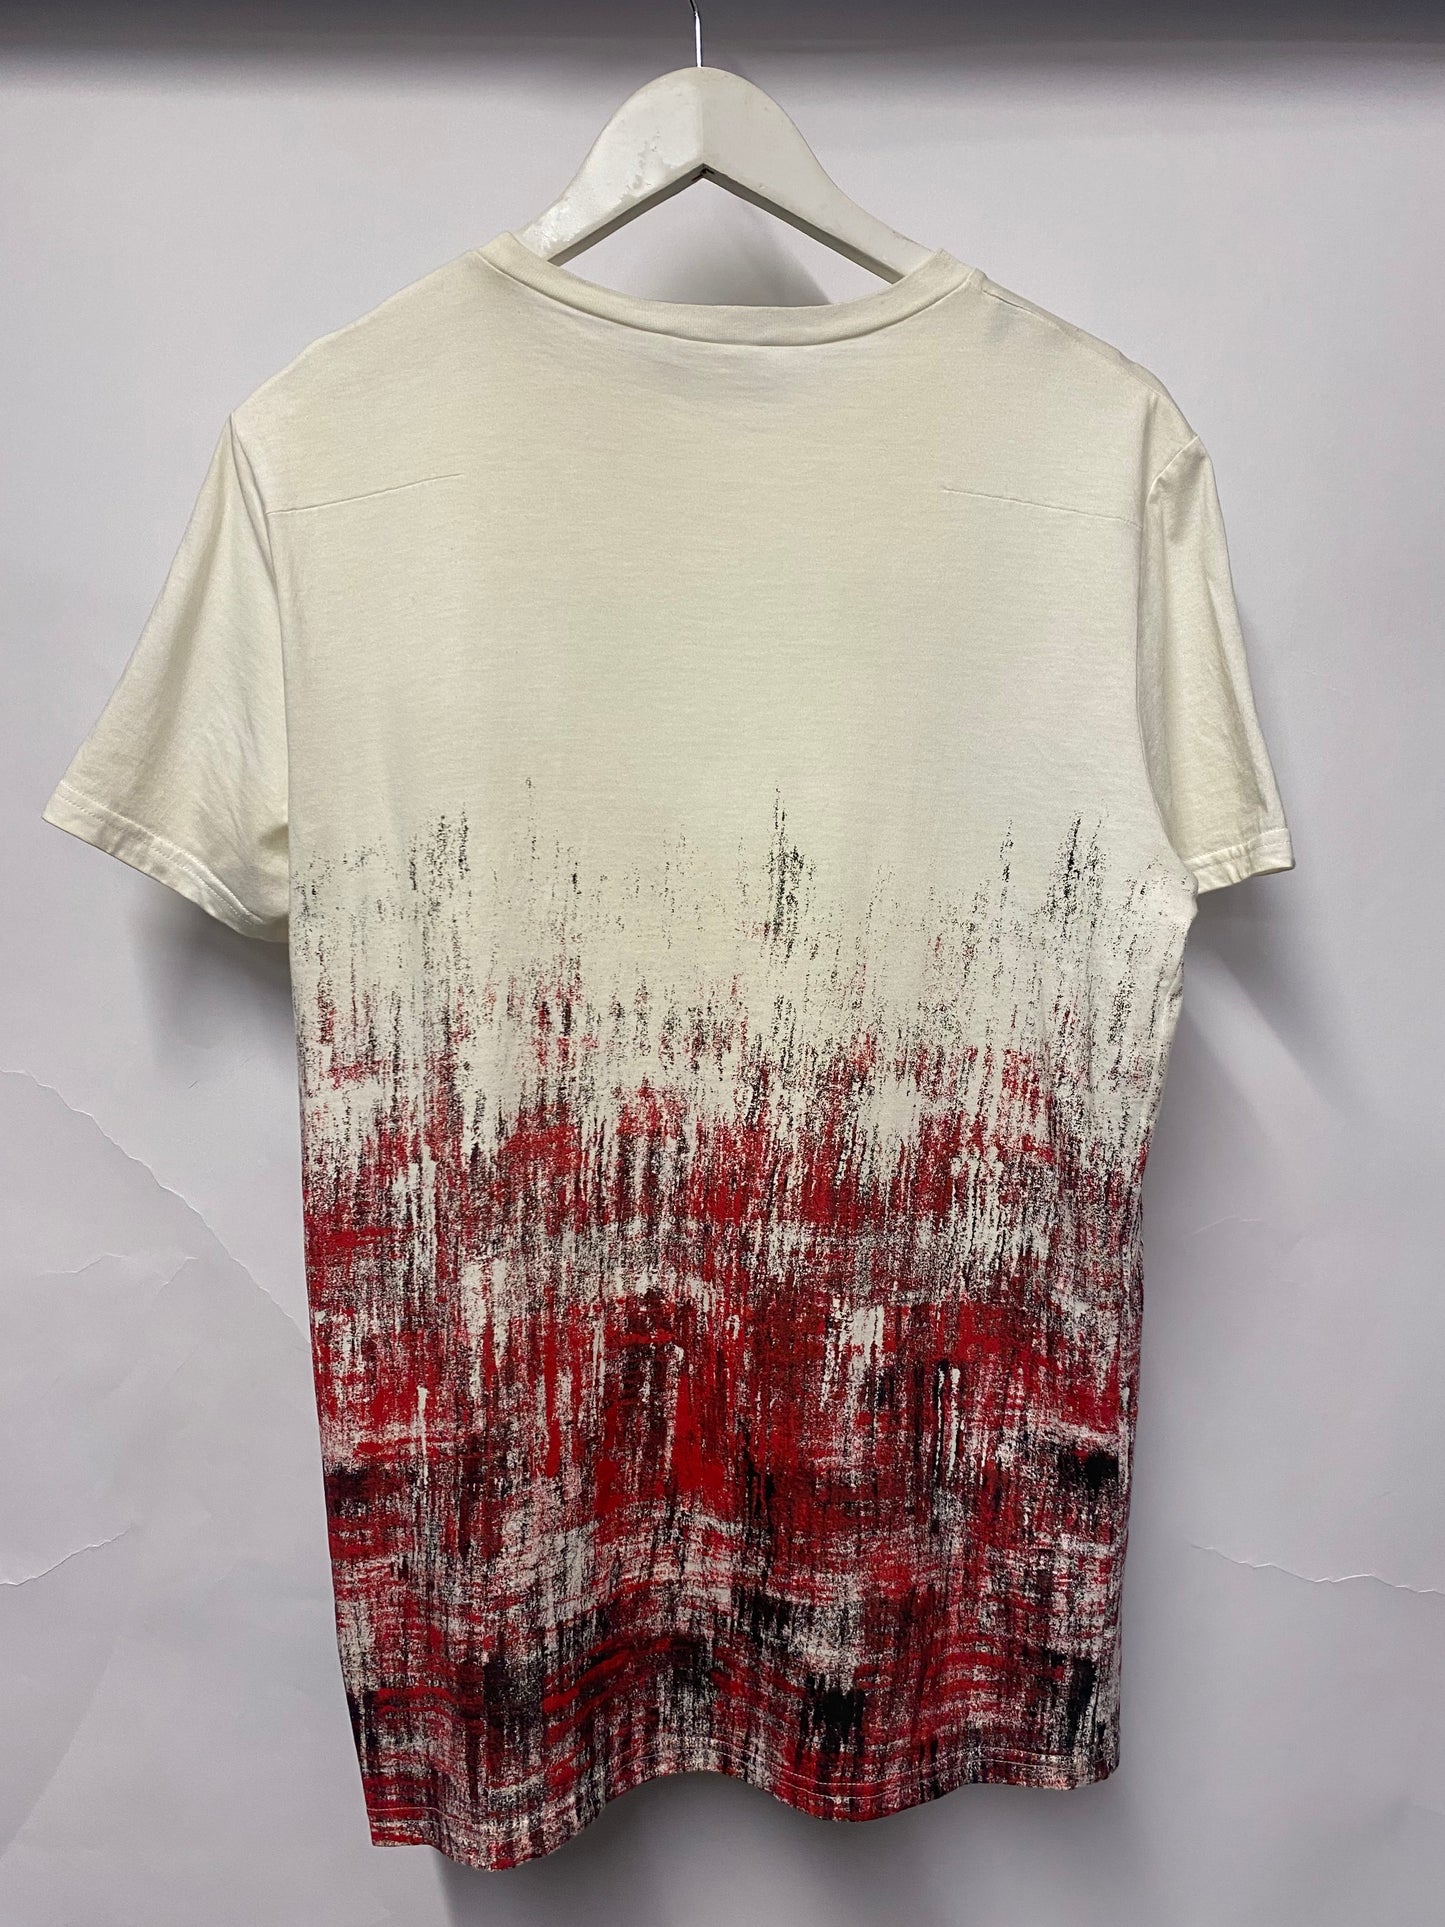 Dior Homme White and Red Patterned Cotton T-shirt Extra Small